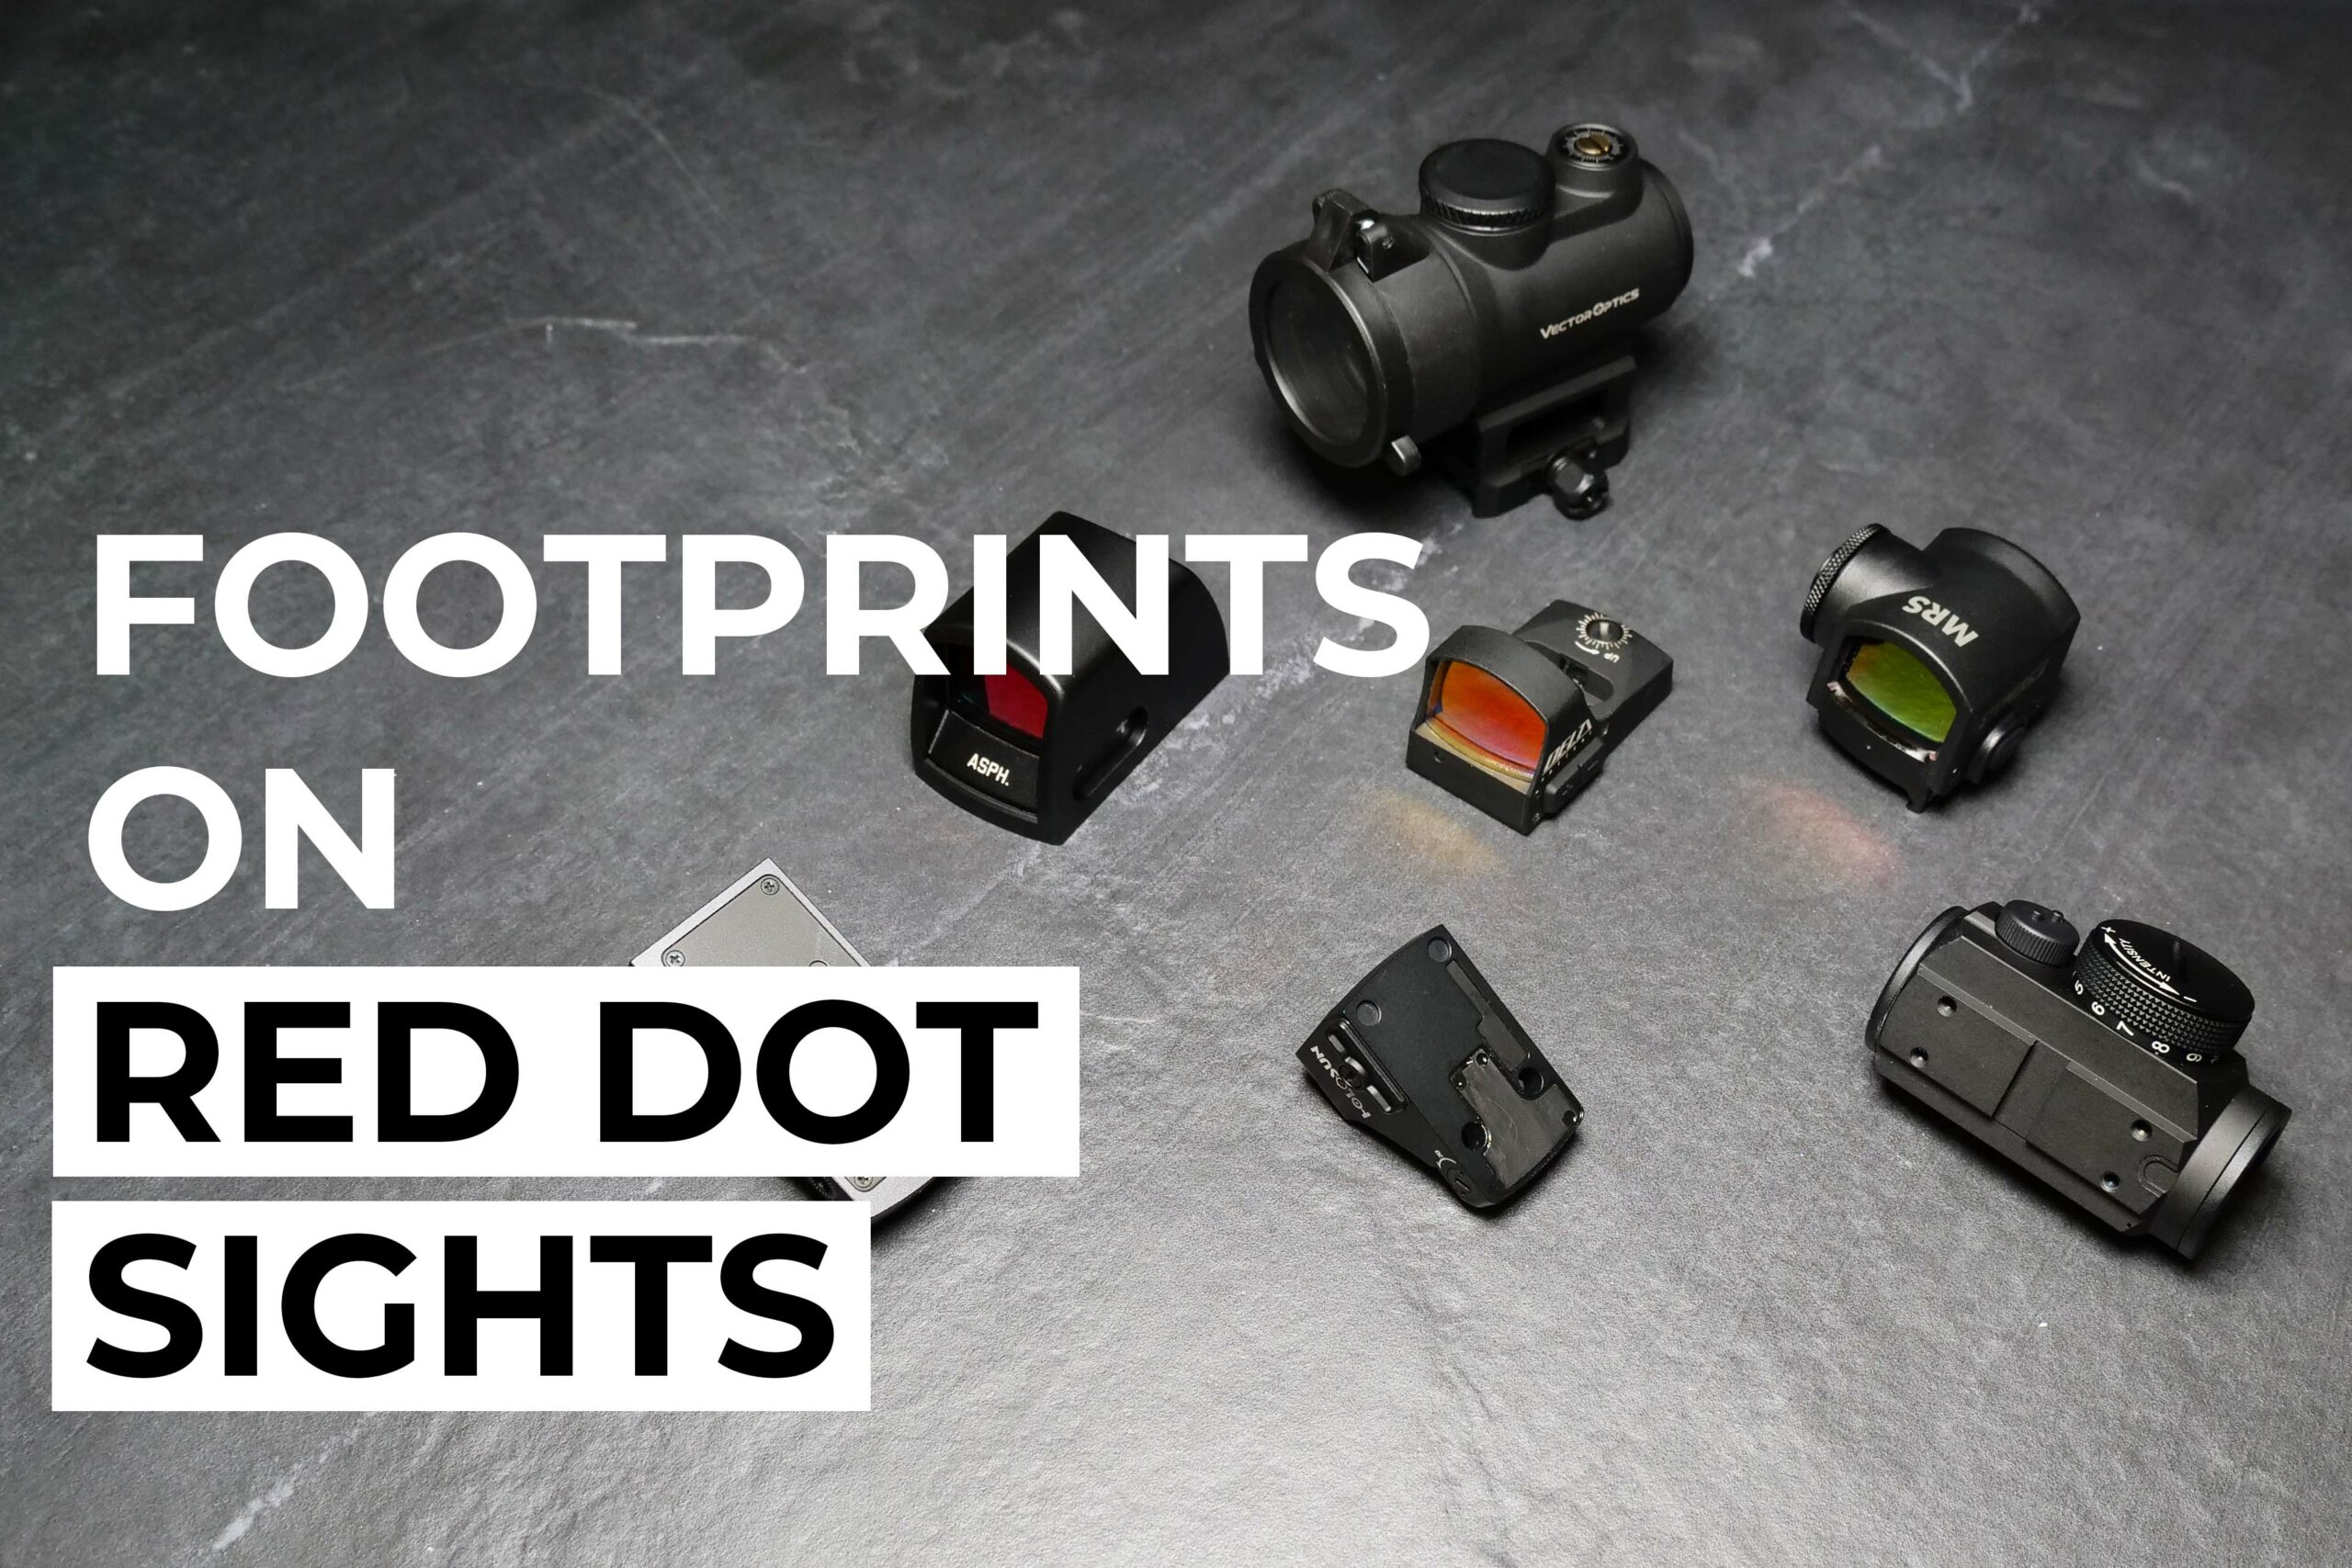 Footprints on red dot sights